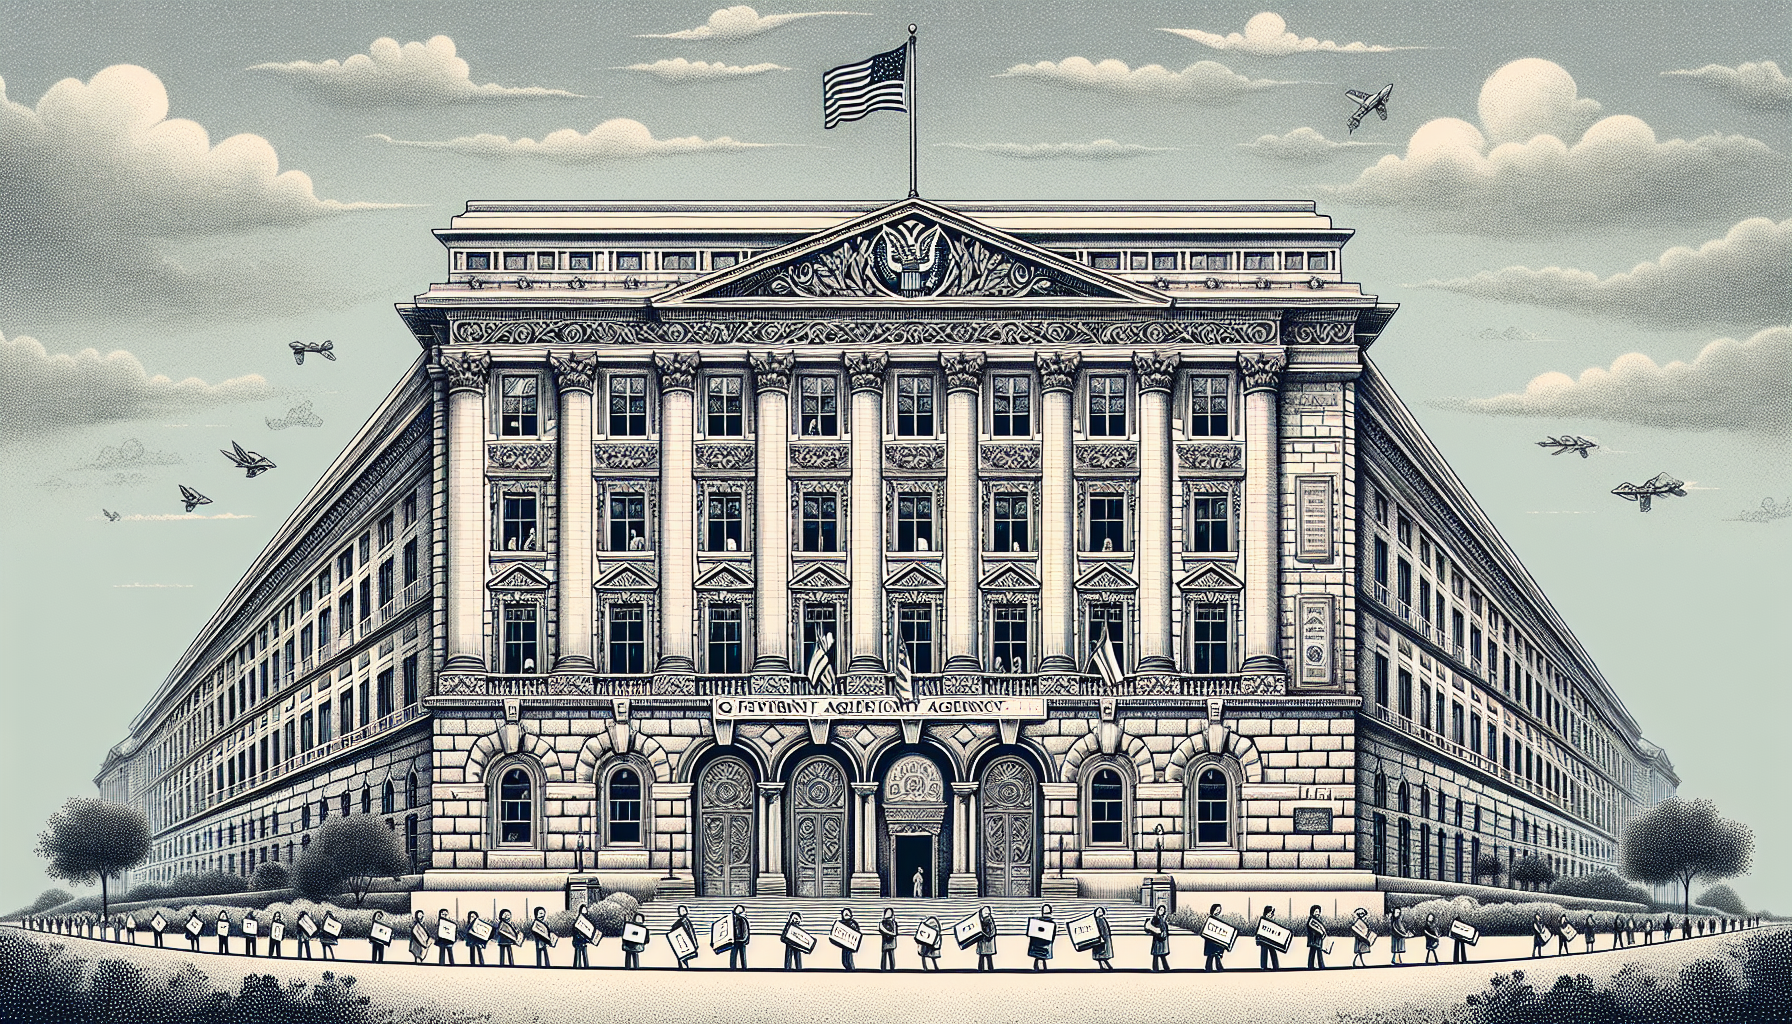 Illustration of a government agency building with the American flag flying outside